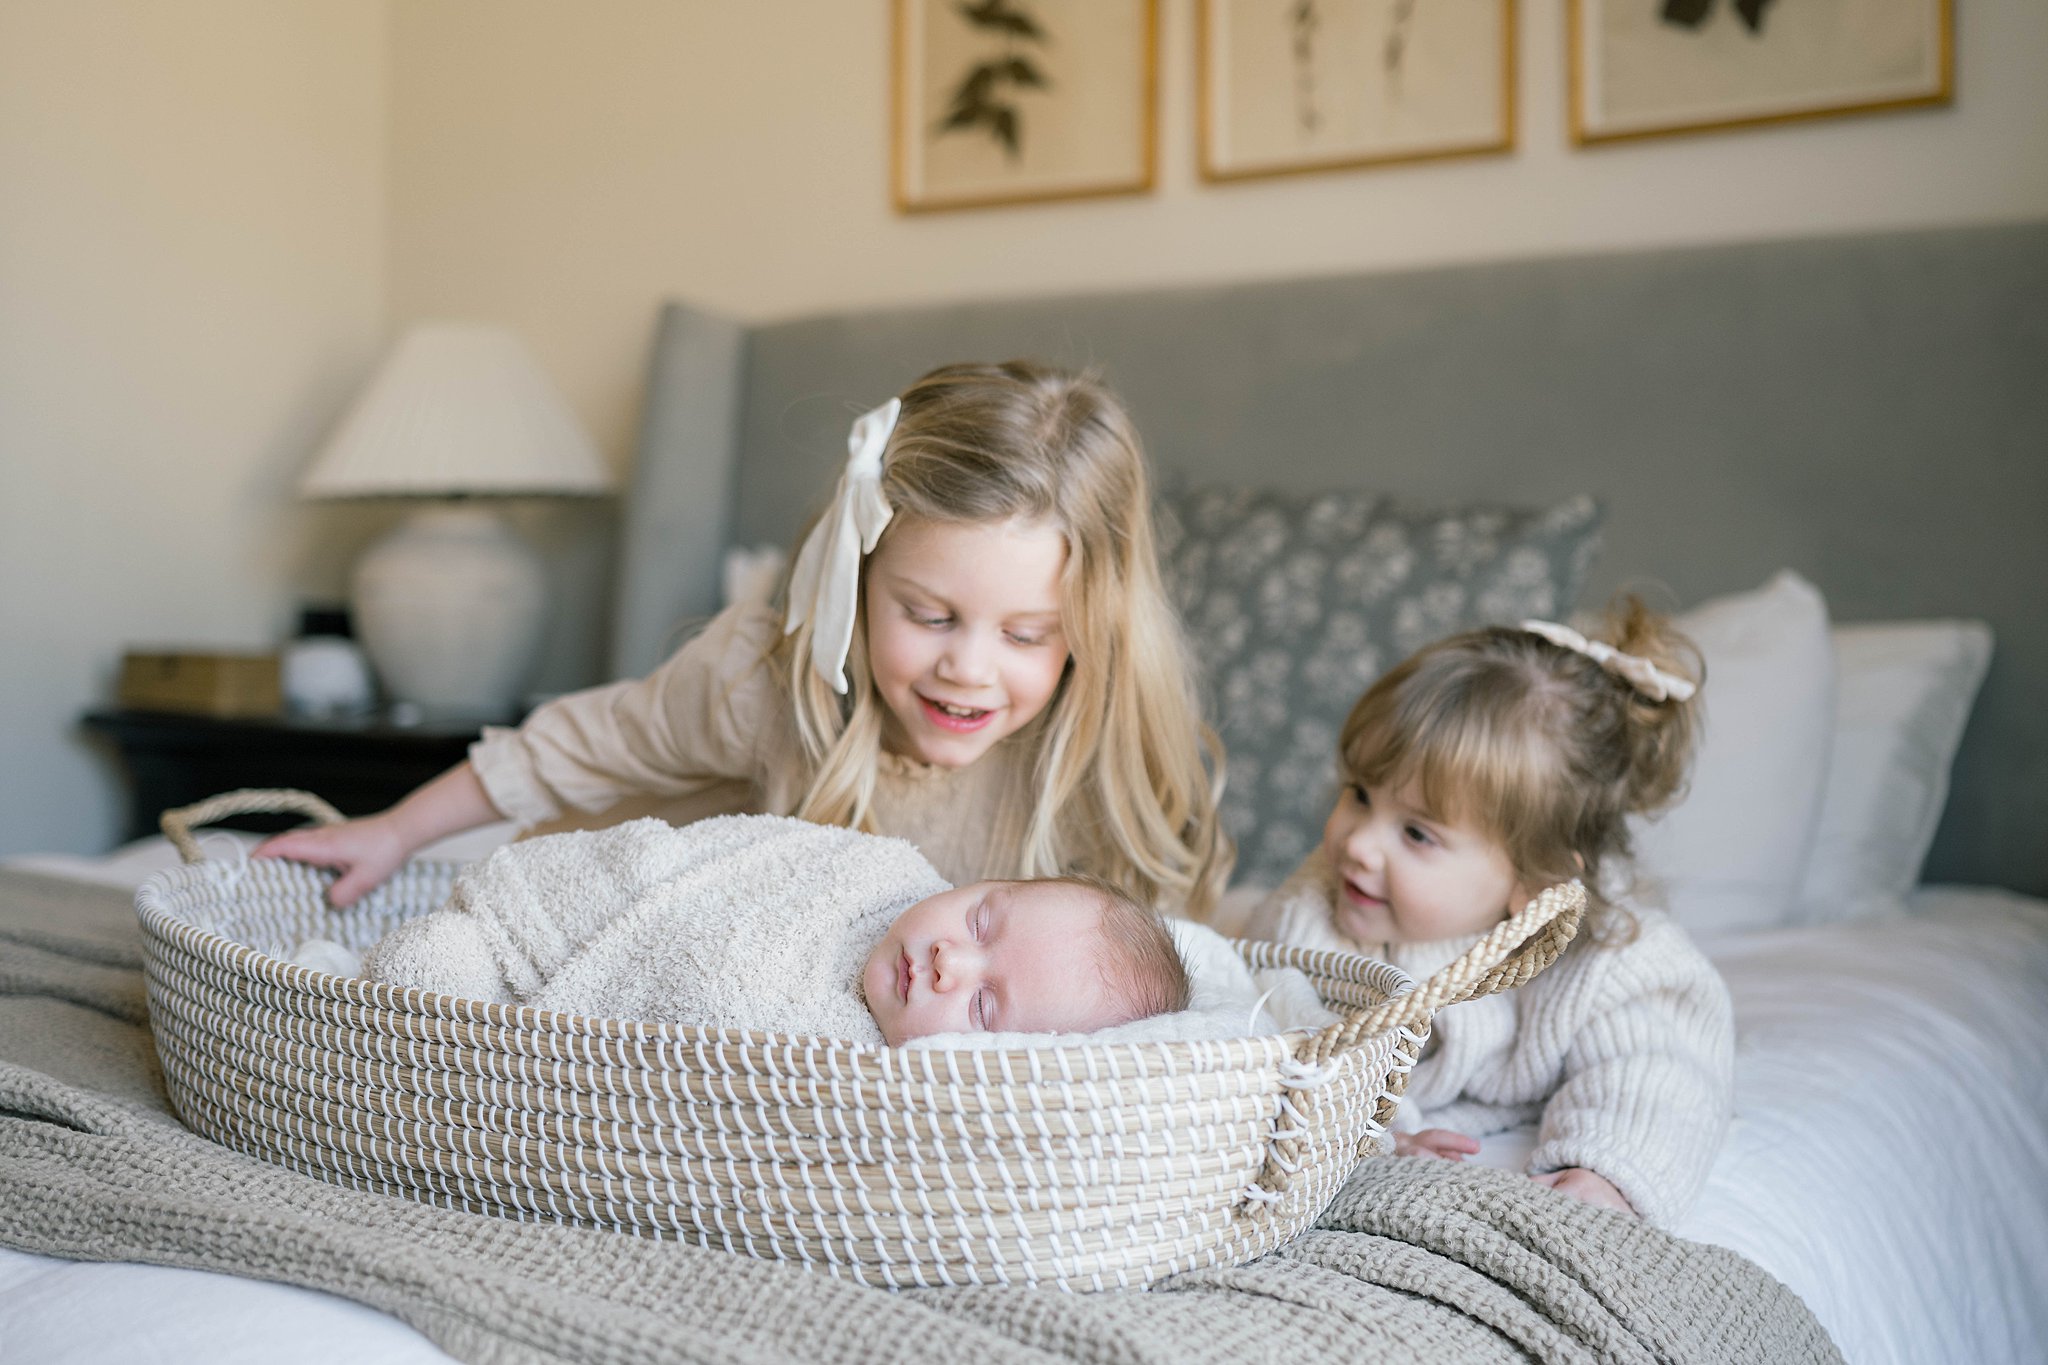 Two young sisters look over their sleeping newborn baby sibling in a woven basket on a bed